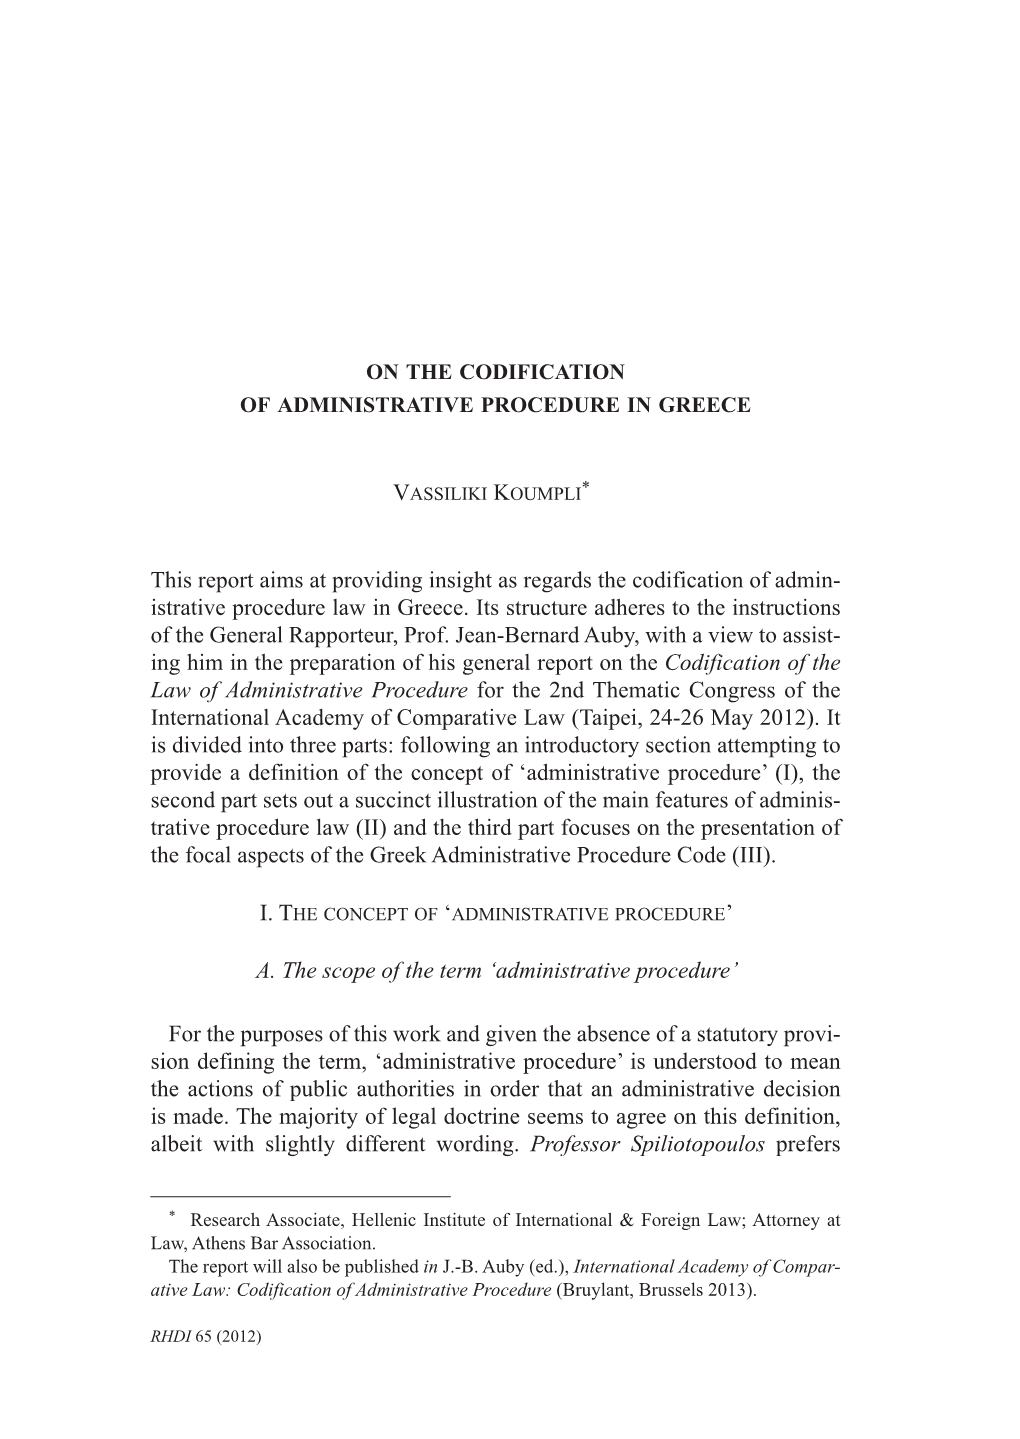 On the Codification of Administrative Procedure in Greece